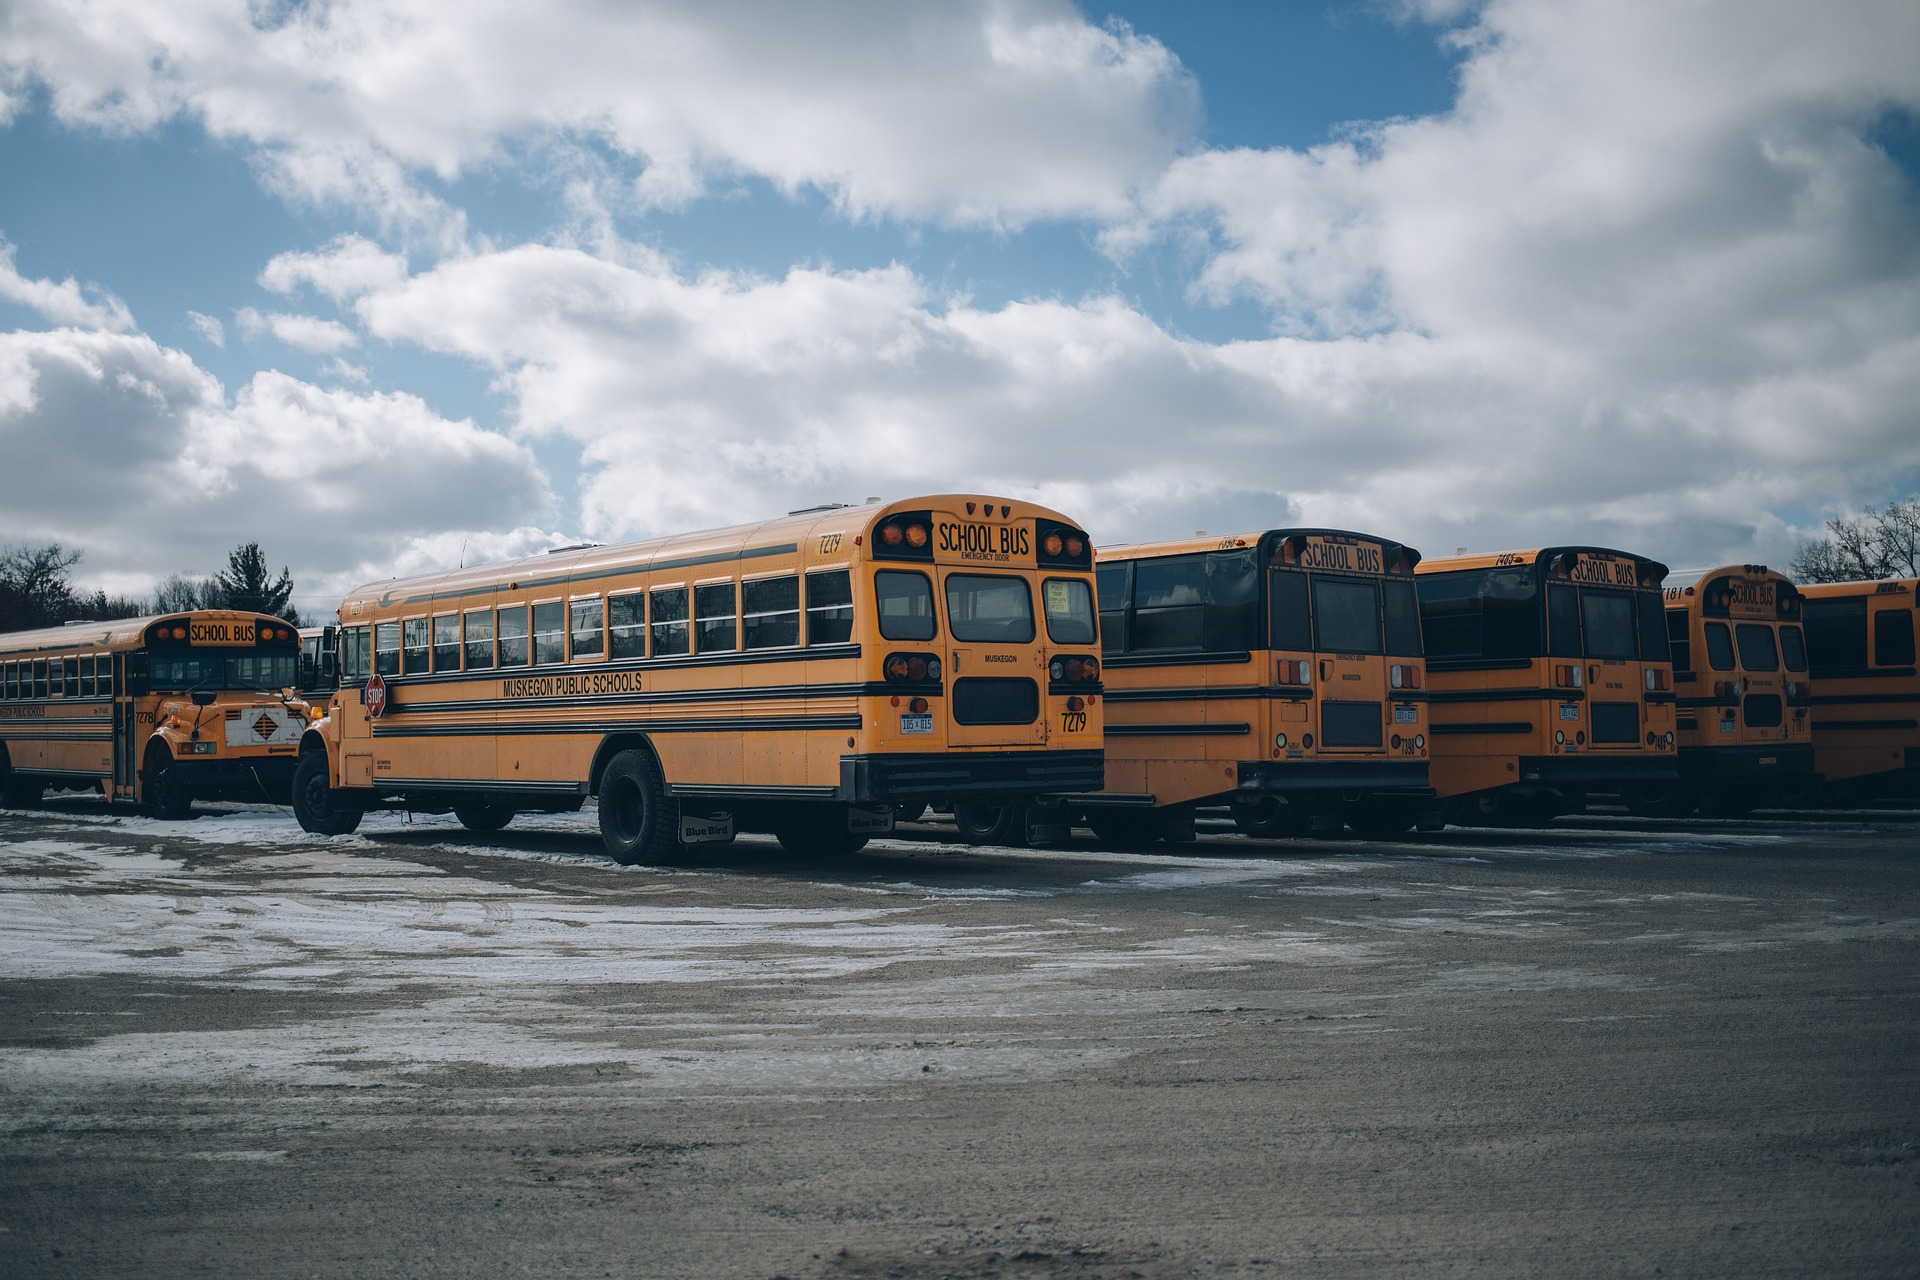 A row of school buses parked in a snowy parking lot under a cloudy blue sky.